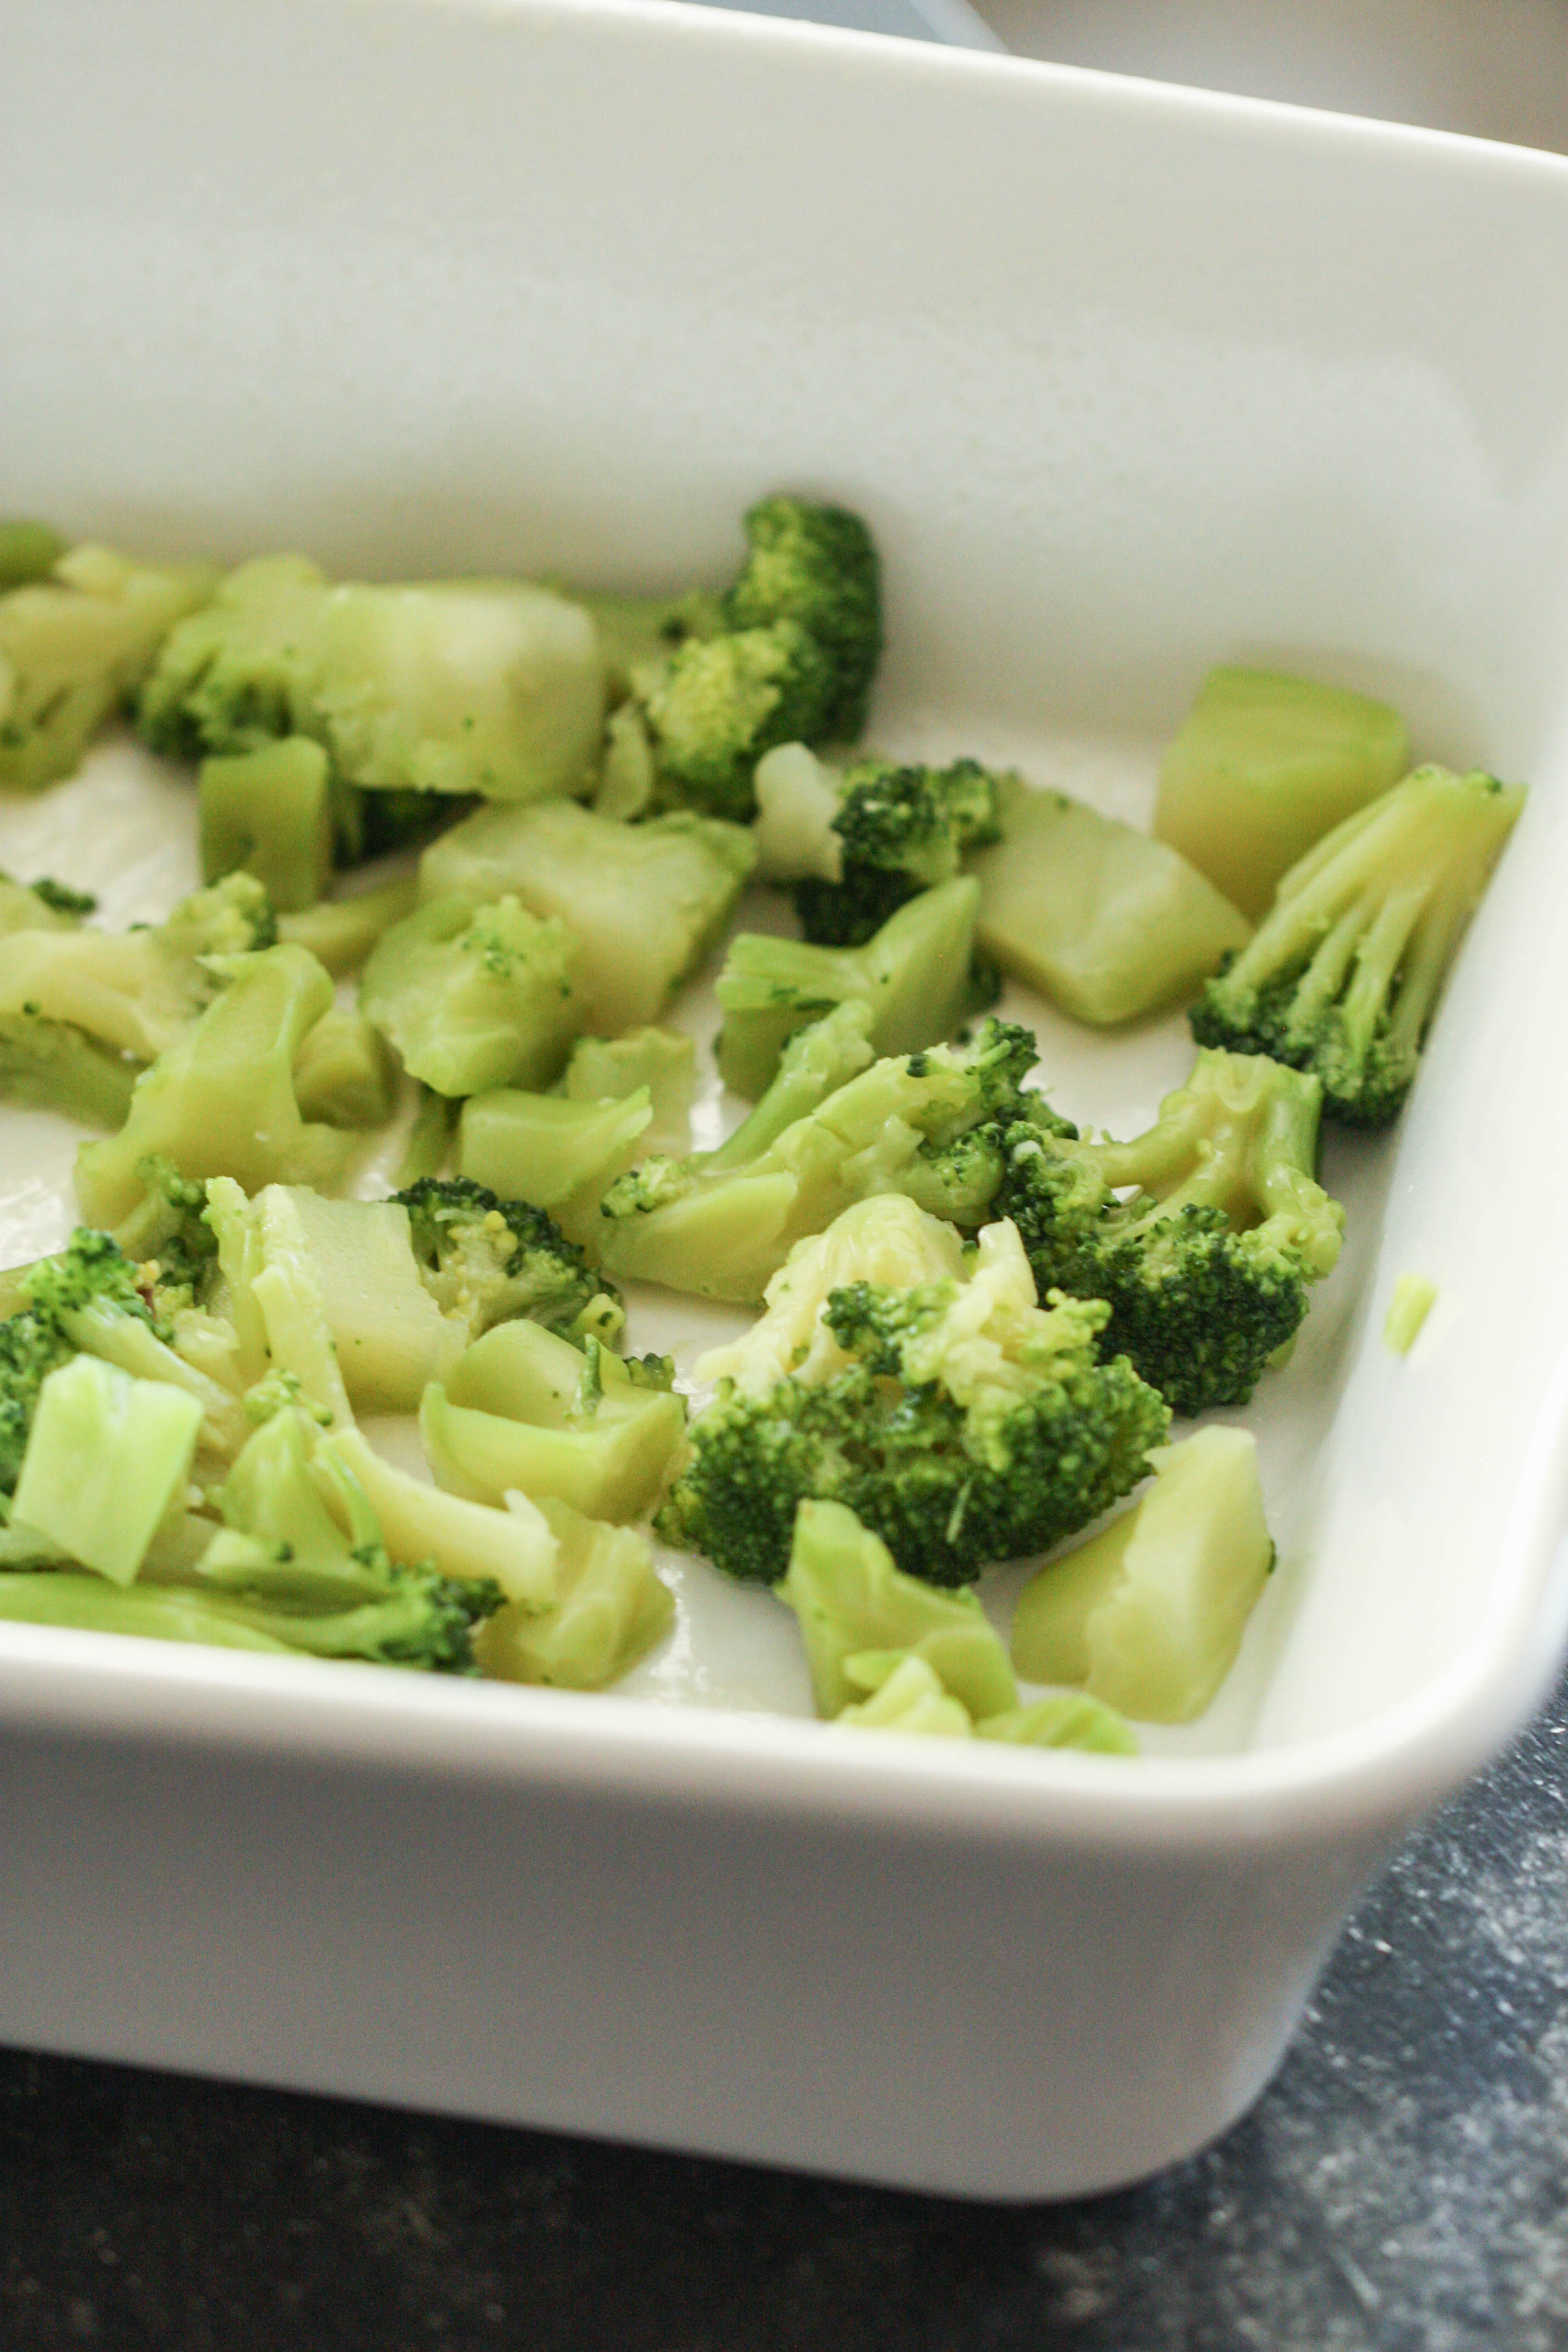 Steamed broccoli in baling dish